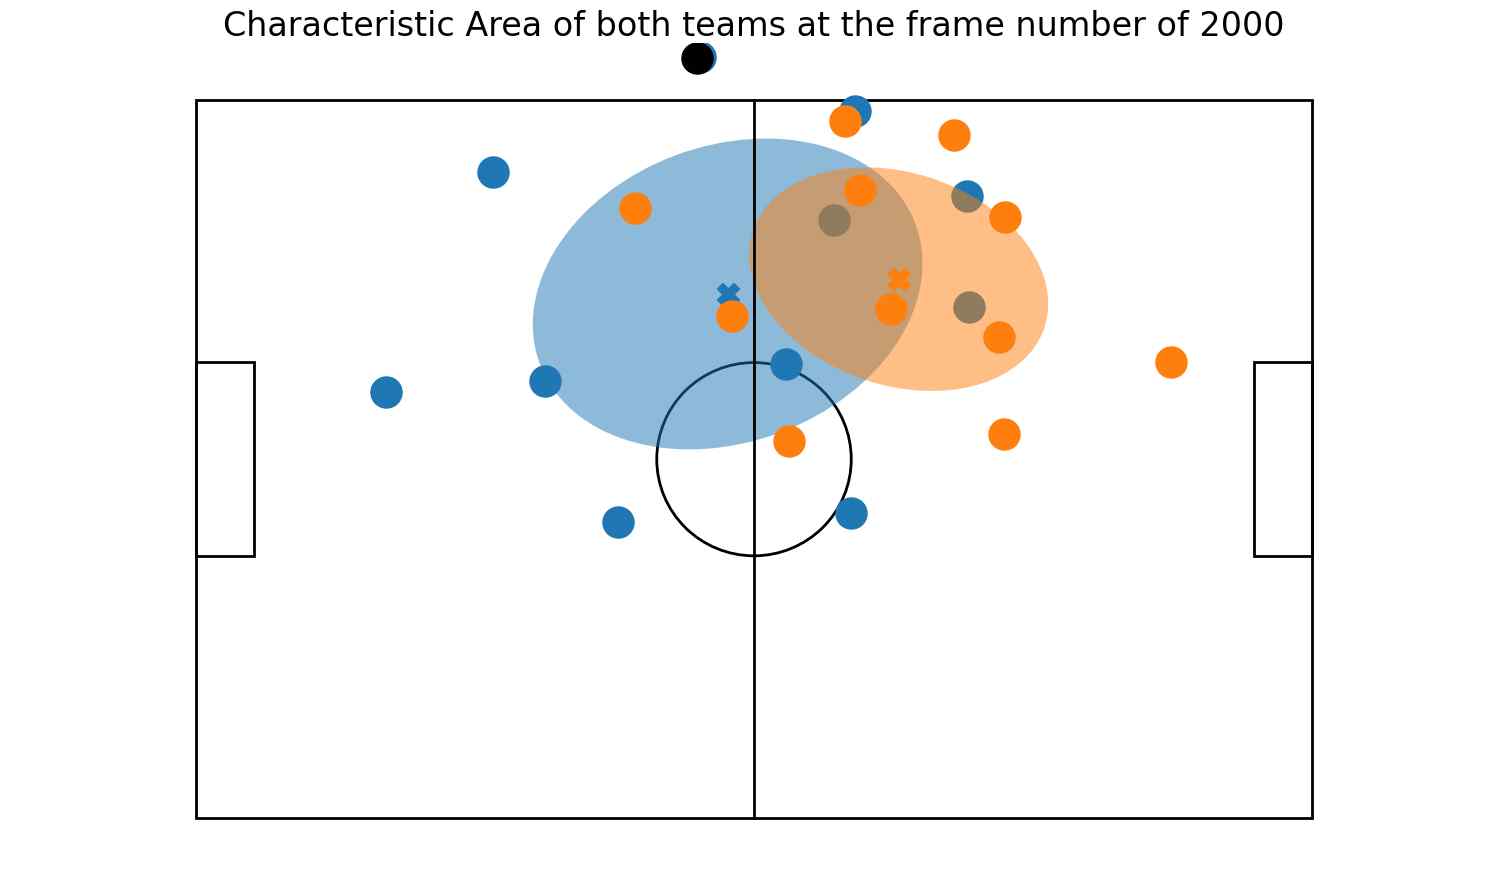 A top-view diagram of a soccer field showing the characteristic areas of both teams at the 2000th frame, represented by two dynamic blobs that depict the spatial distribution of players.